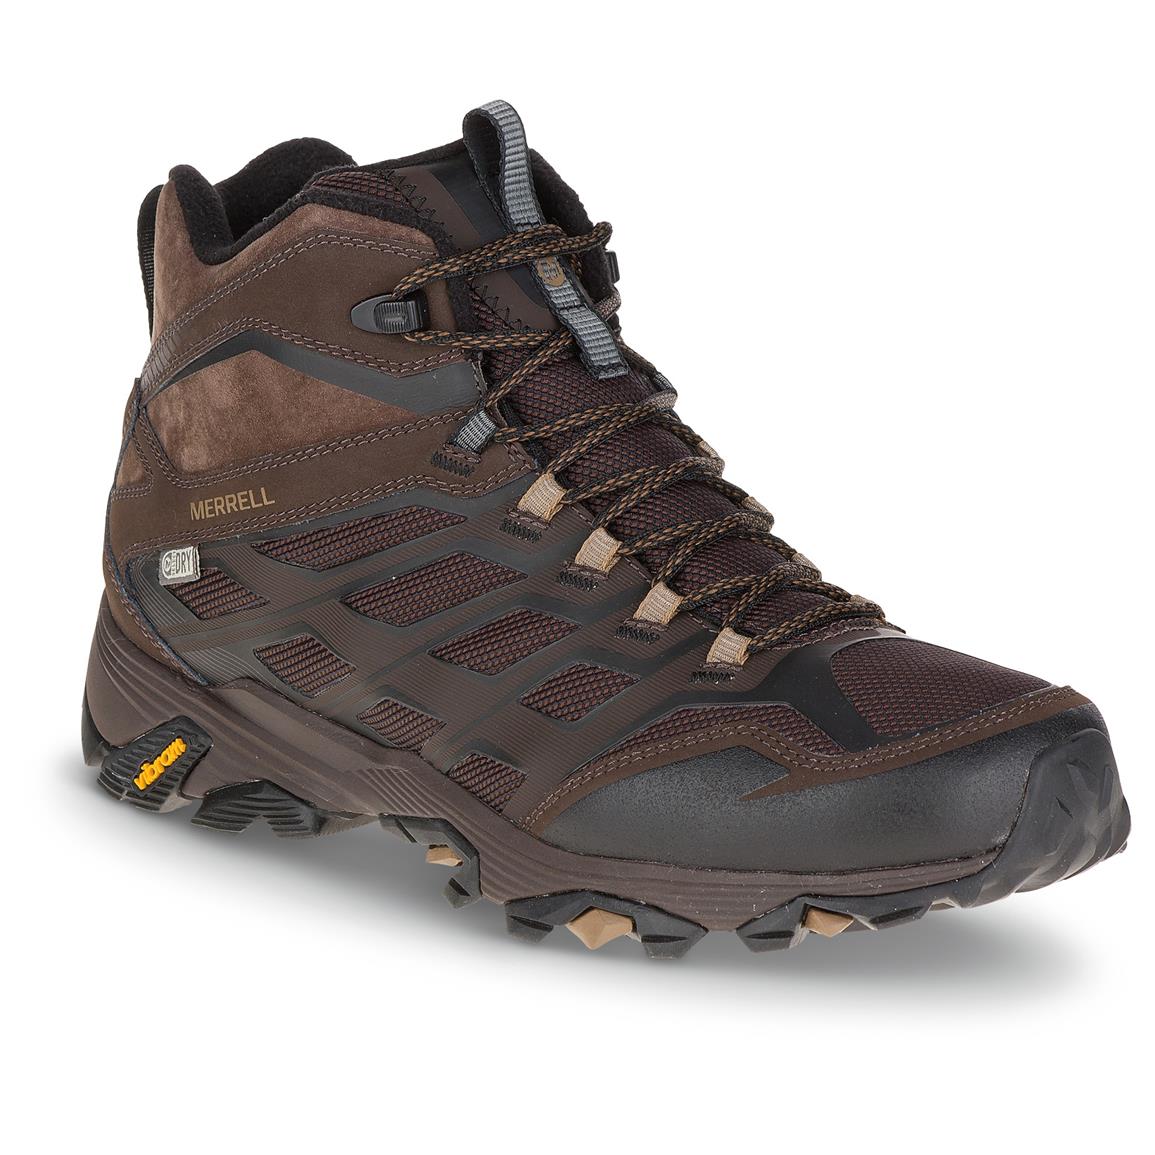 Merrell Men's Moab FST Ice+ Thermo Hiking Boots - 665552, Hiking Boots ...